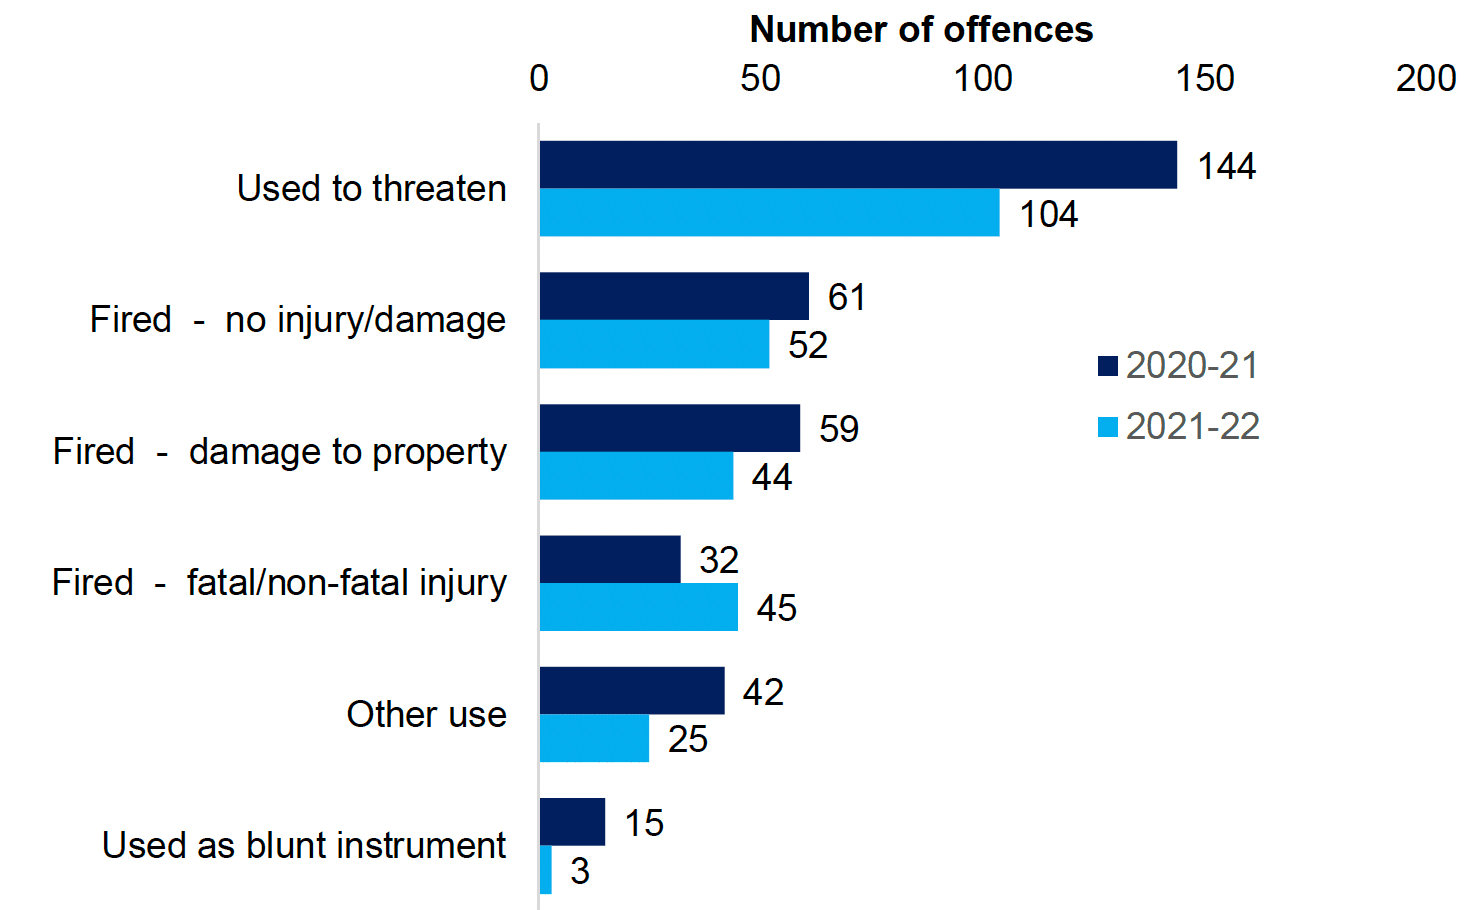 A bar chart showing that in most offences the main firearm was used to threaten in both 2020-21 and 2021-22 whilst the main firearm was used as a blunt instrument in the least number of offences in both years.